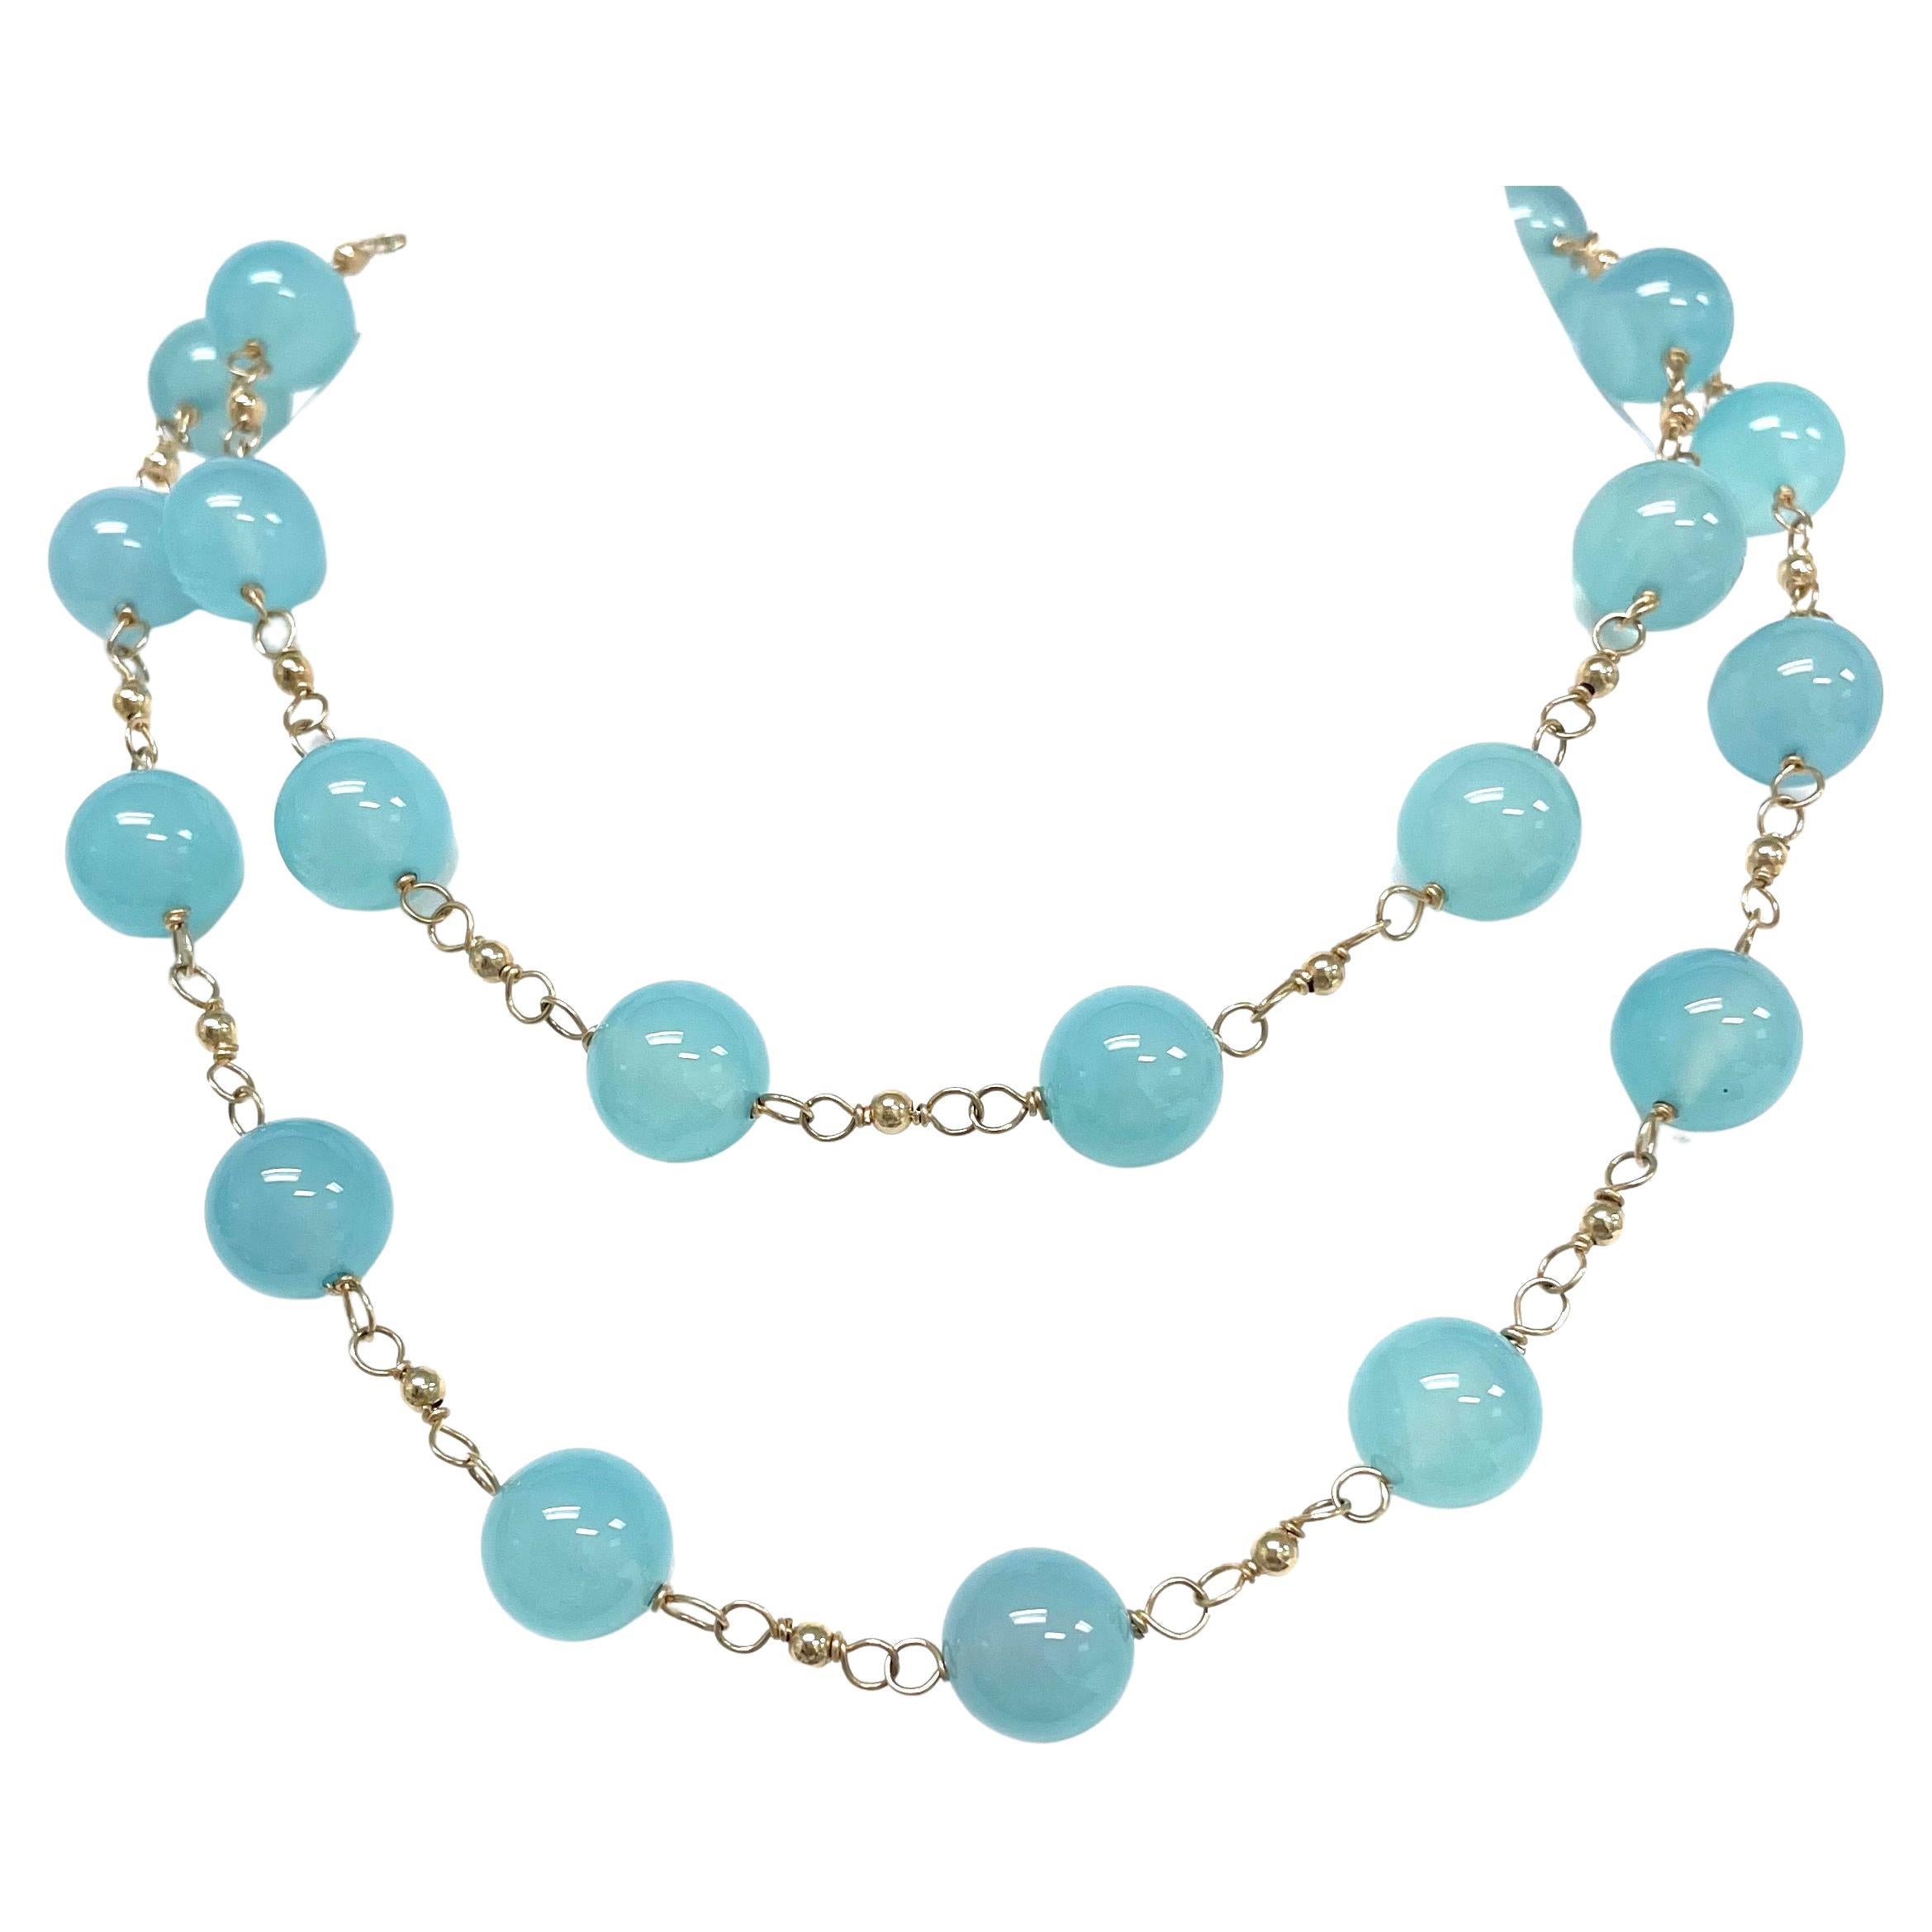 Description
Beautiful, vivid and calming Aqua Chalcedony (AAA quality), individually wire wrapped and accented with small yellow gold-filled balls to create an overall harmonious and feminine style. The necklace can be worn long or short when